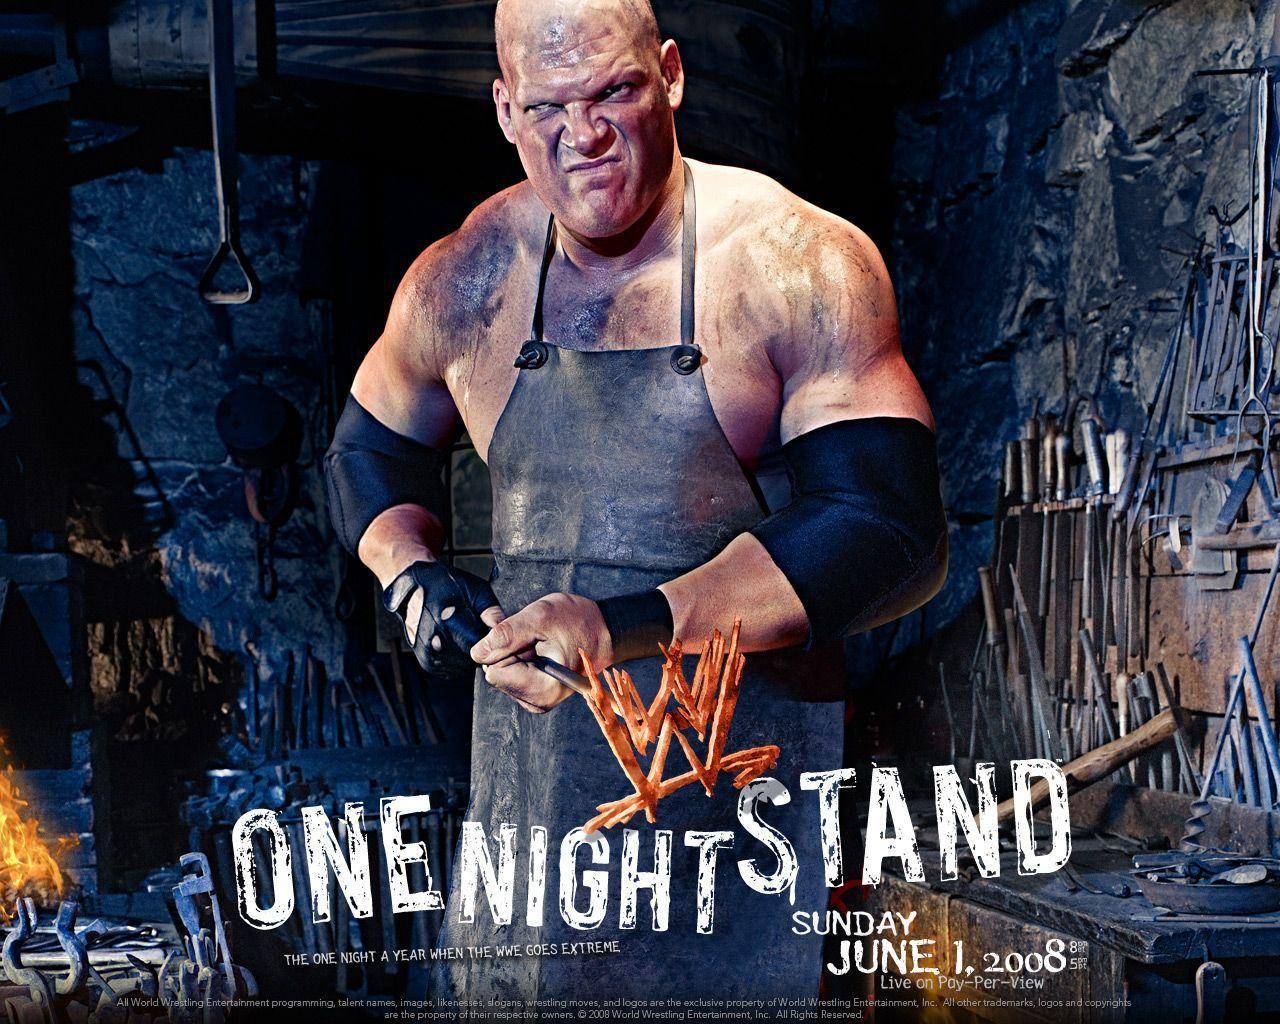 One Night Stand 2008 WWE PPV with the monster Kane